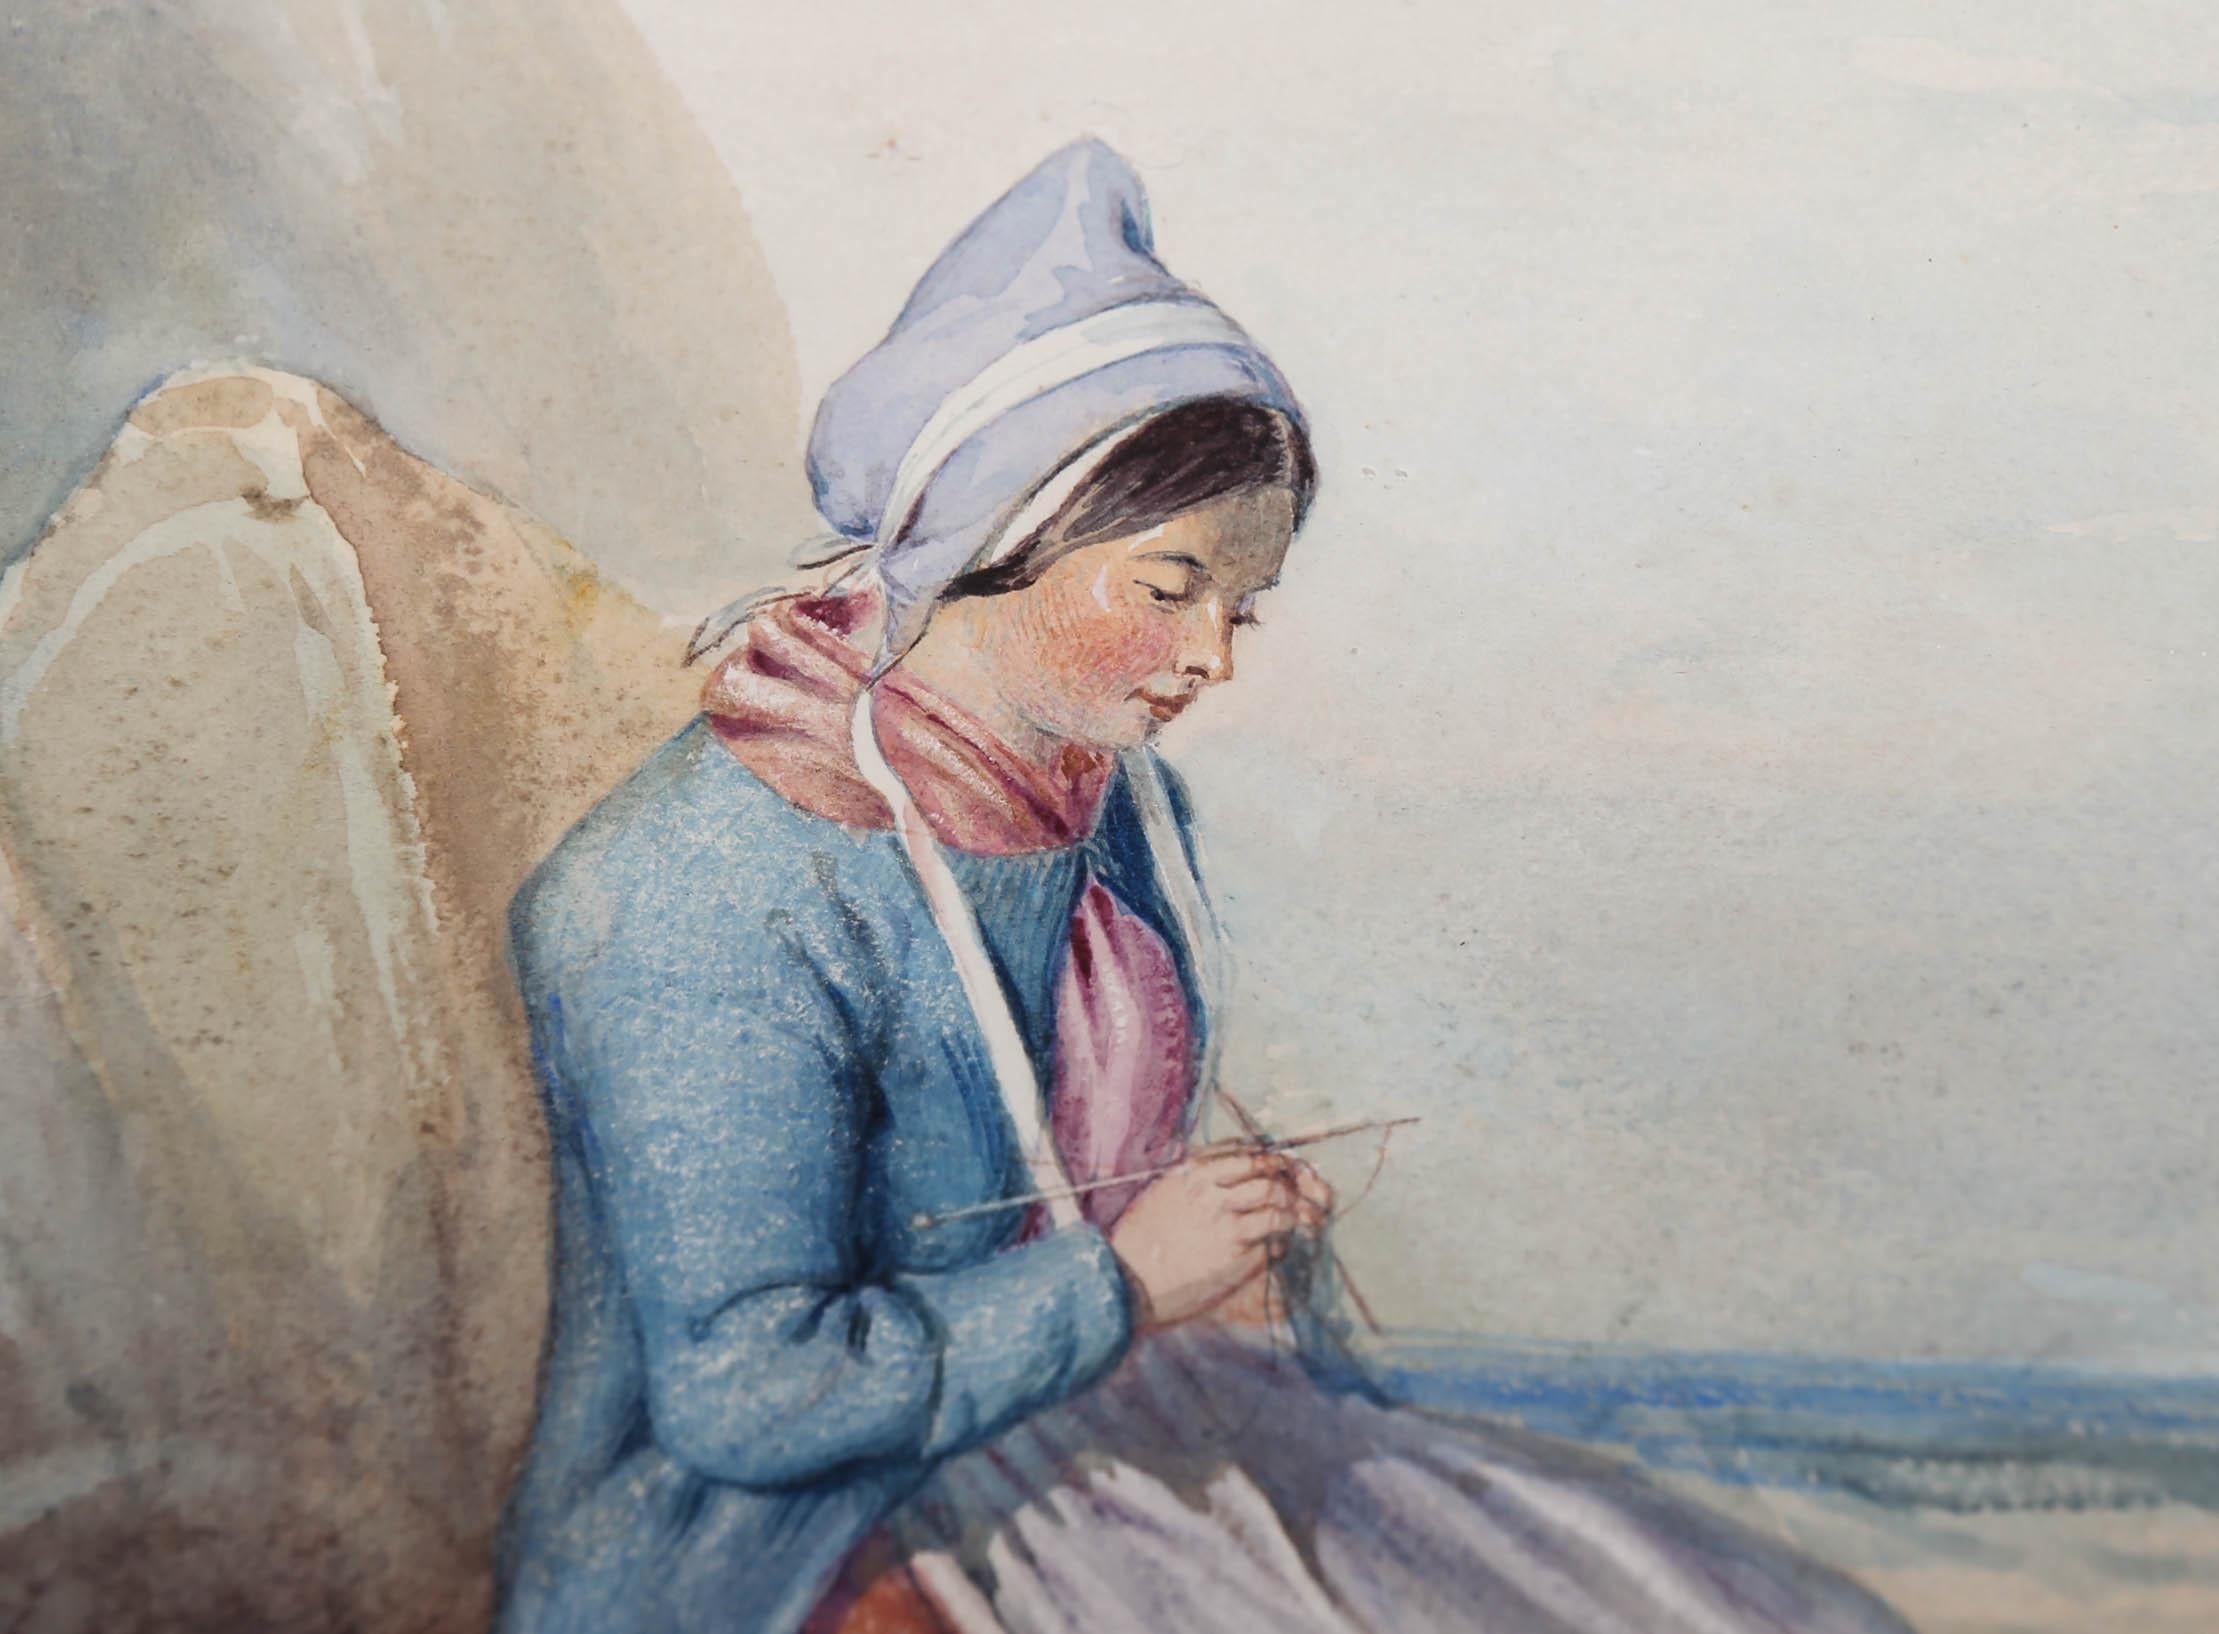 Delia Robins (fl. 1856-1858) - 1854 Watercolour, Knitting by the Sea For Sale 2